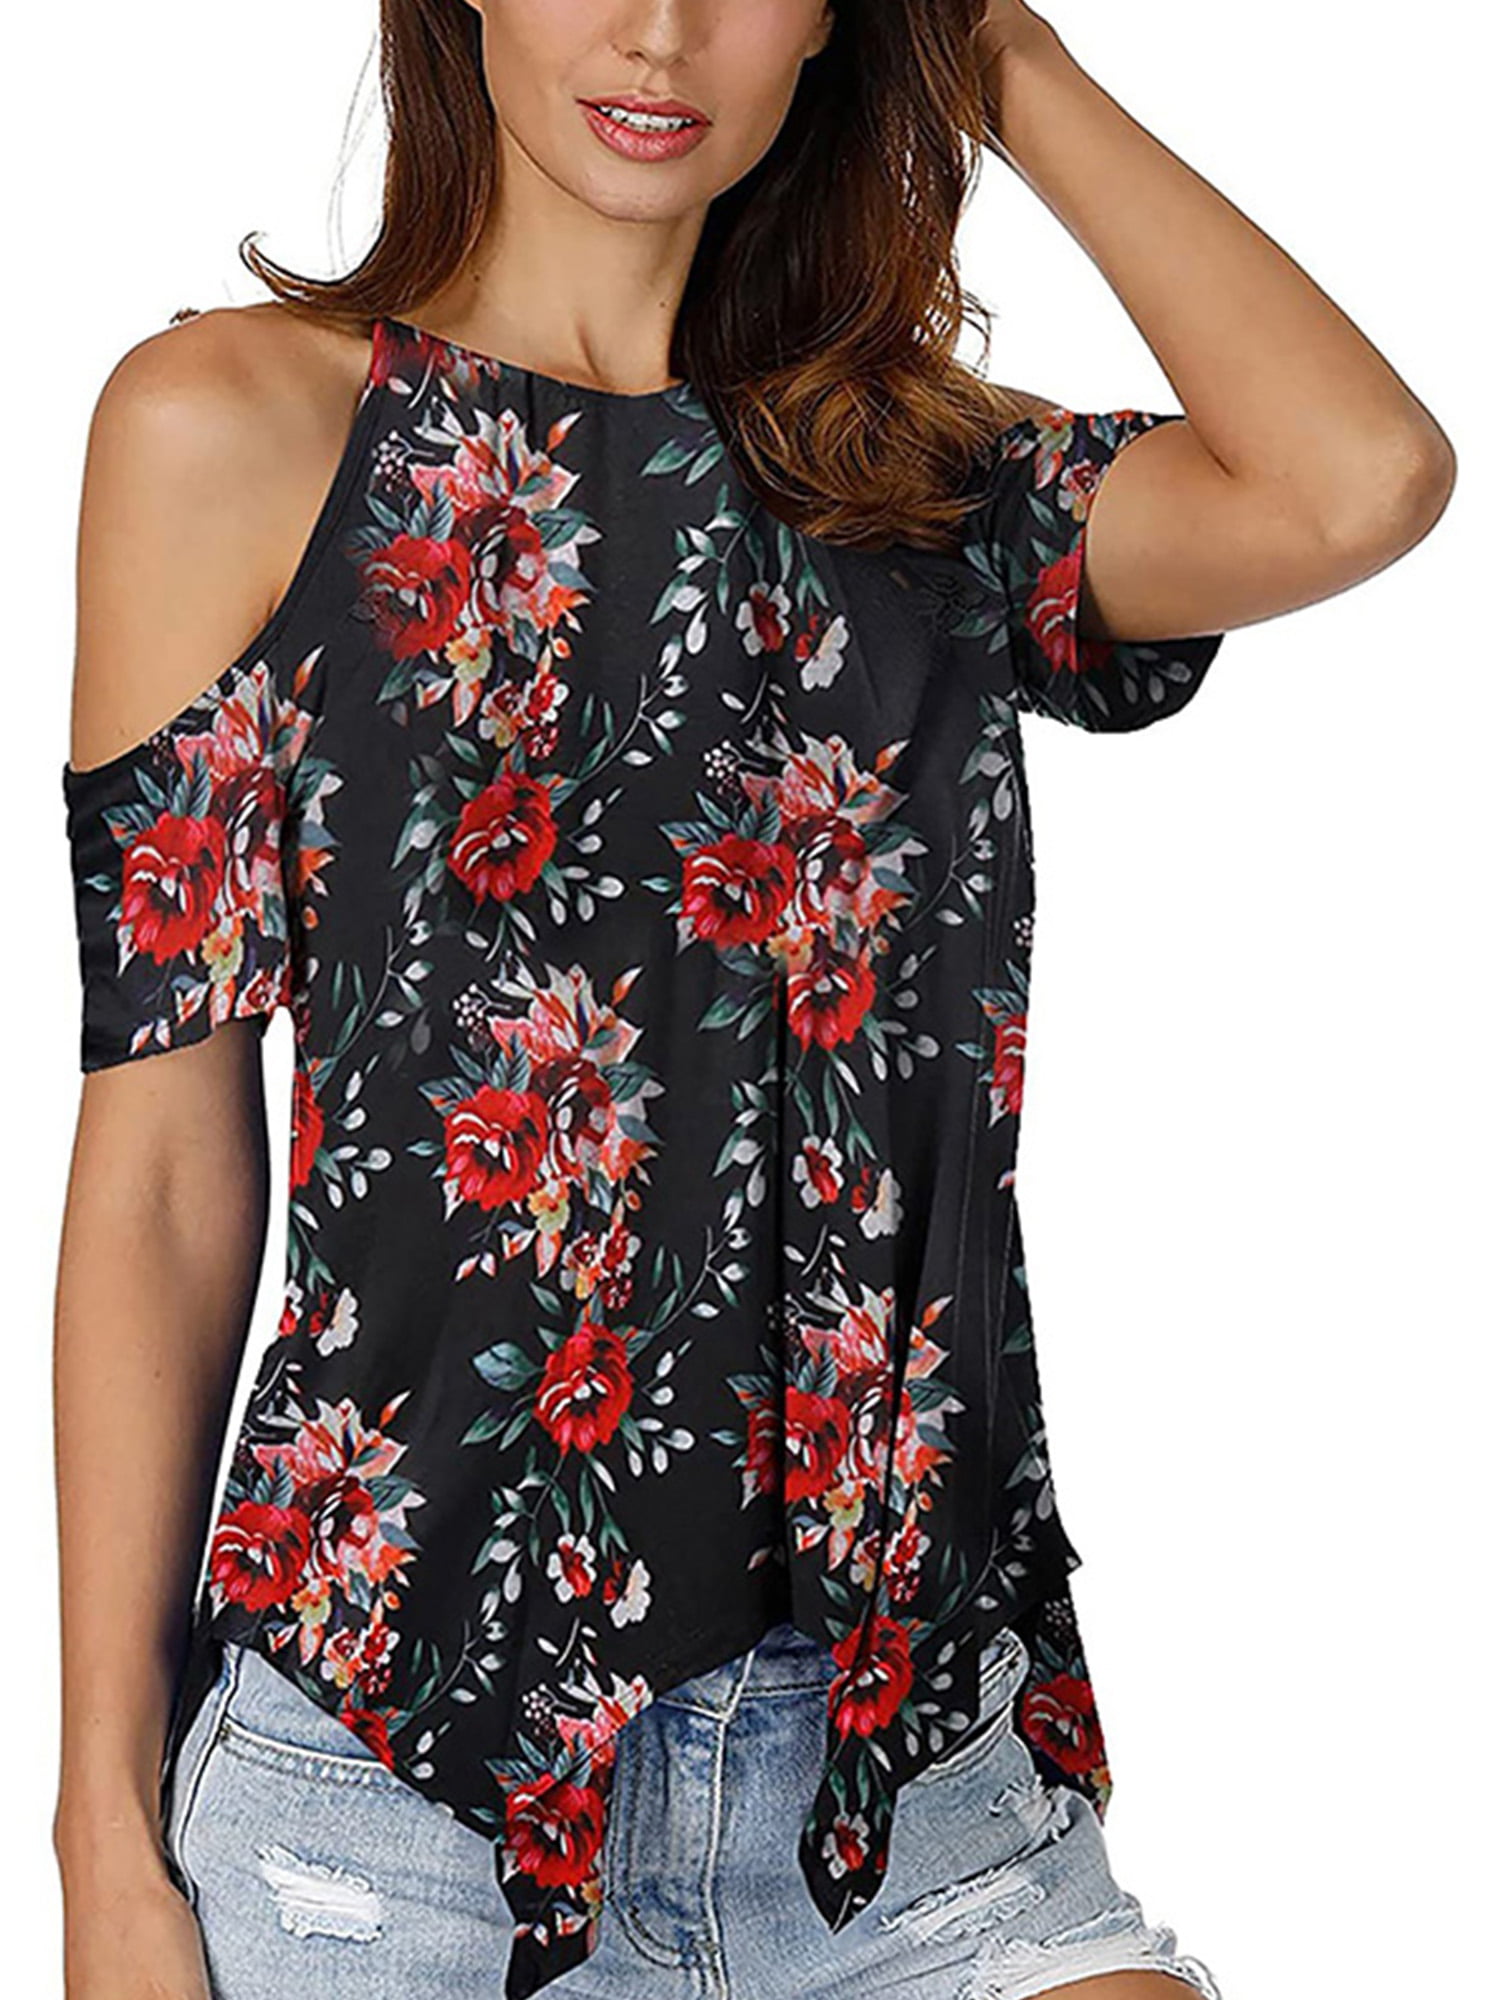 Womens Summer Tops Floral Print Cold Shoulder Short Sleeve Strappy Cold Shoulder T-shirt Tops Blouses Womens Tops